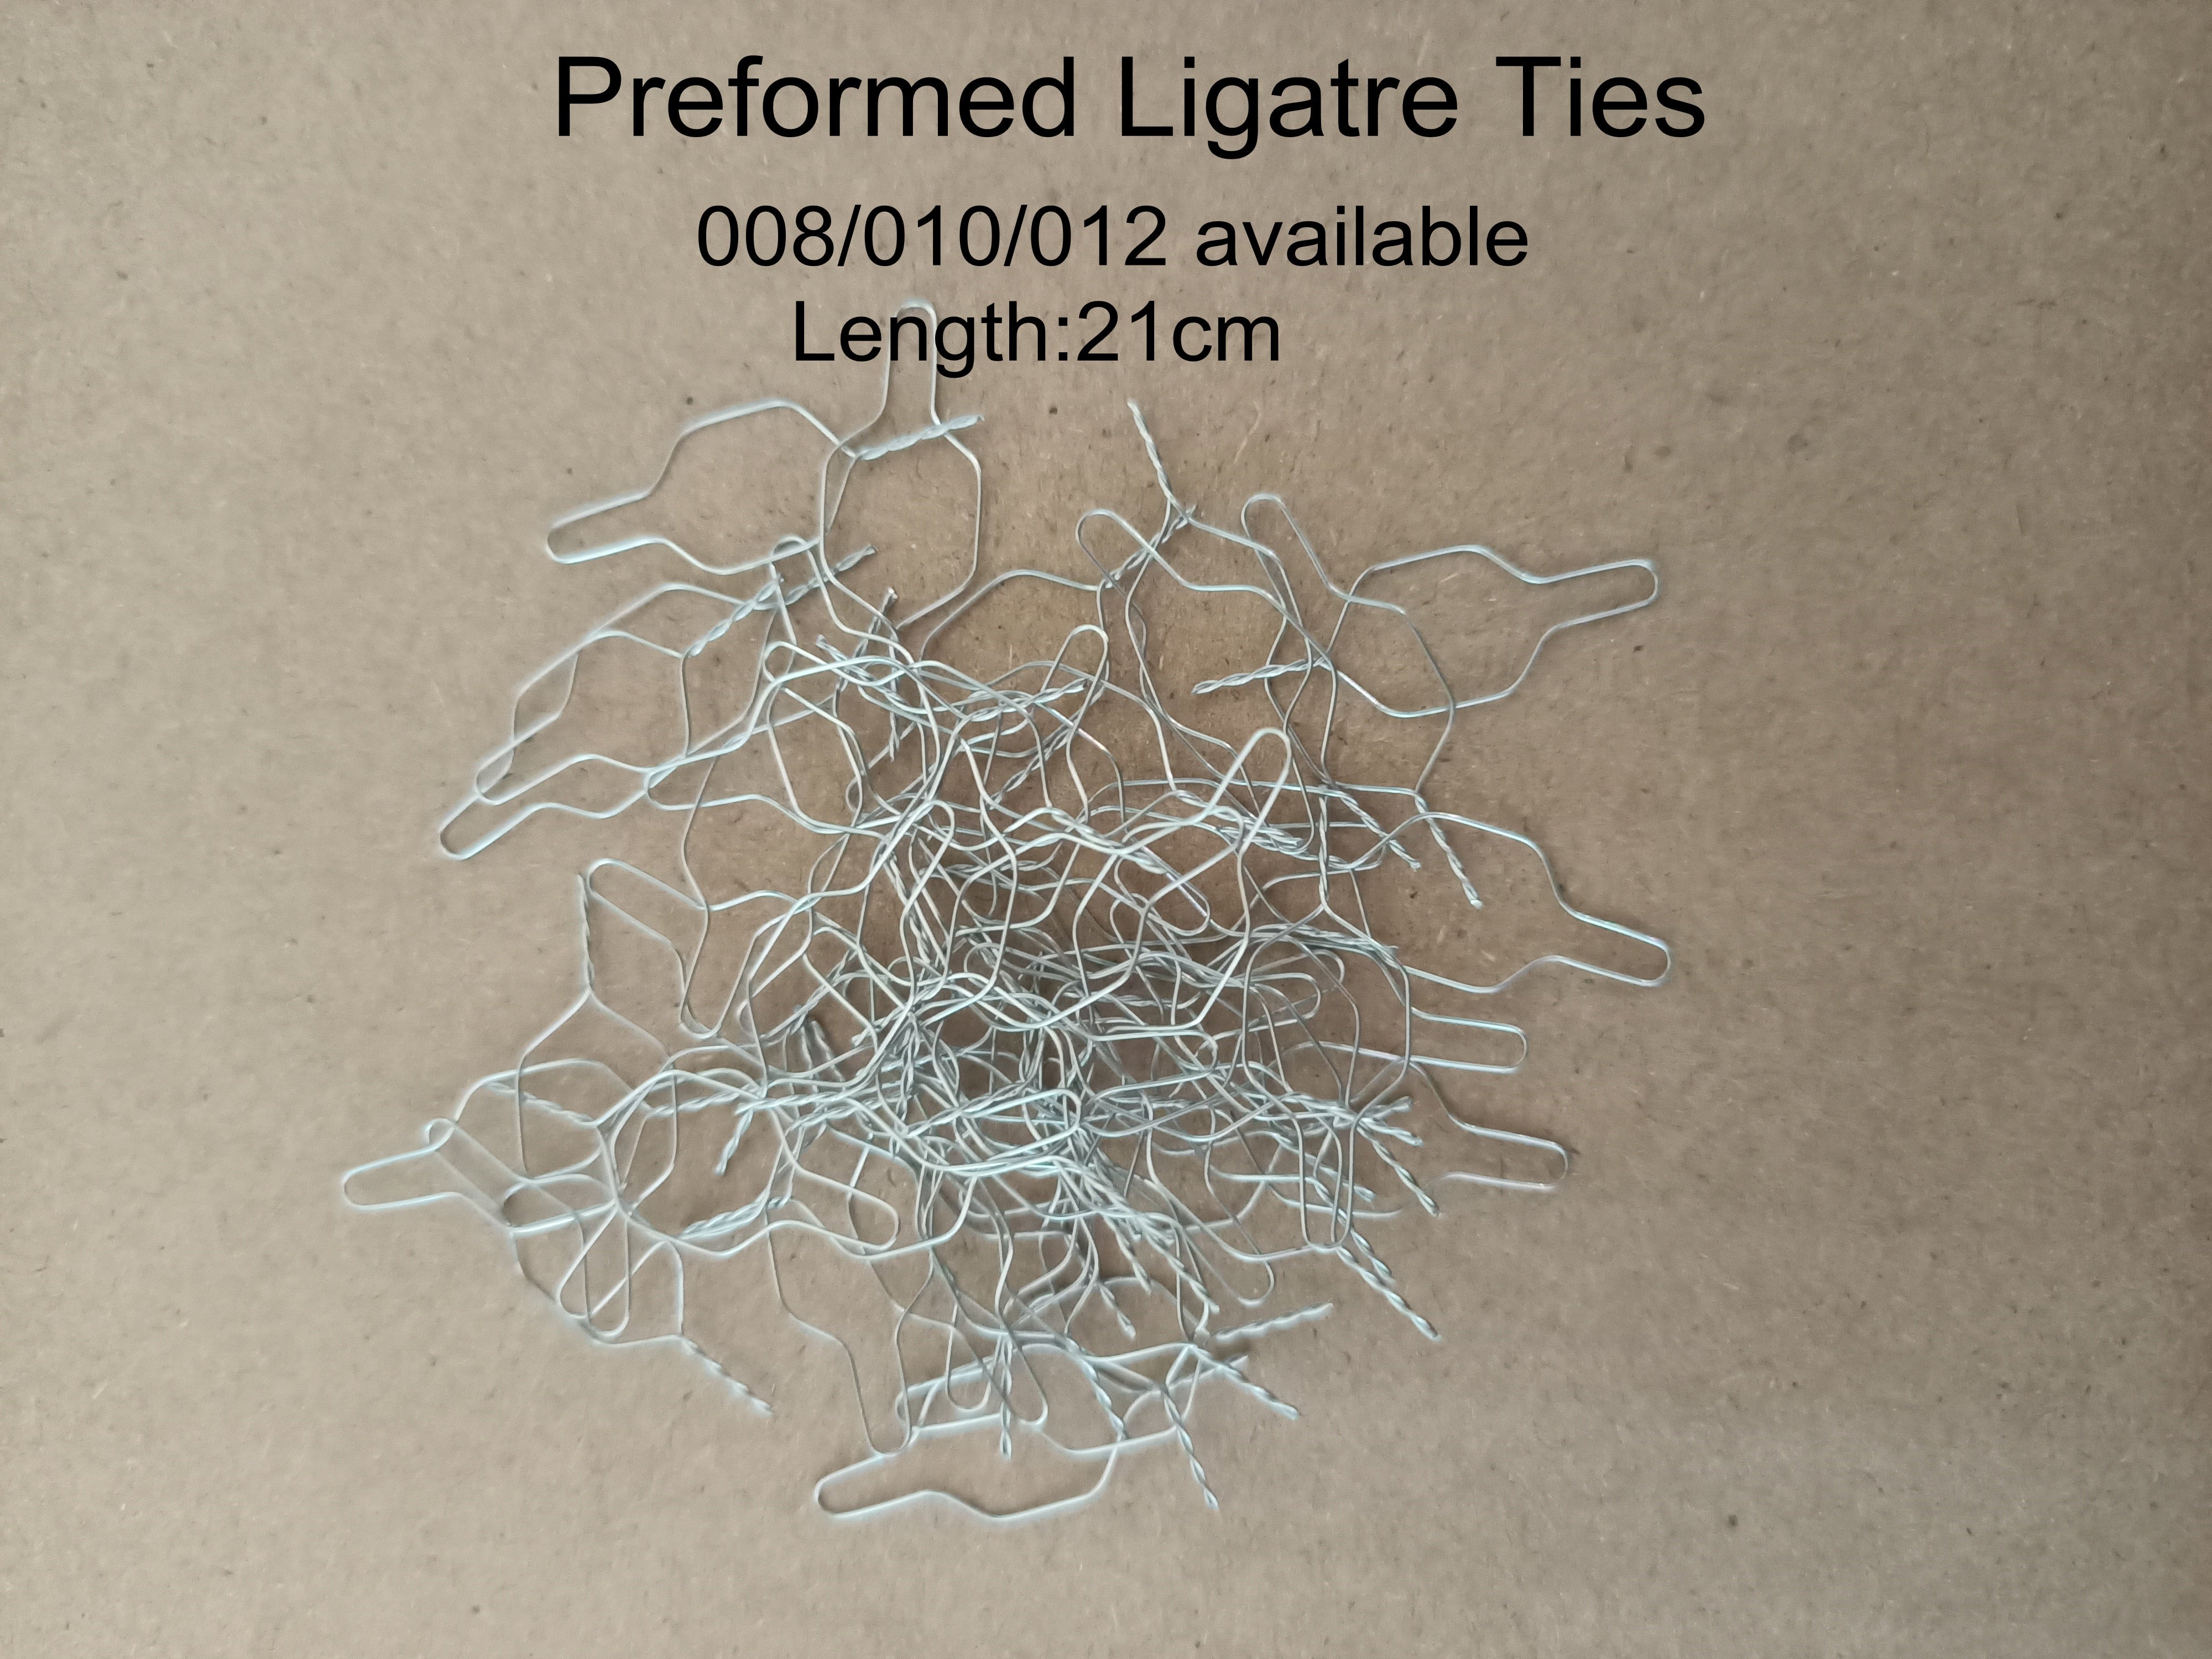 100 Pieces Dental Orthodontic Preformed Ligature Wire Long Short Twisted End